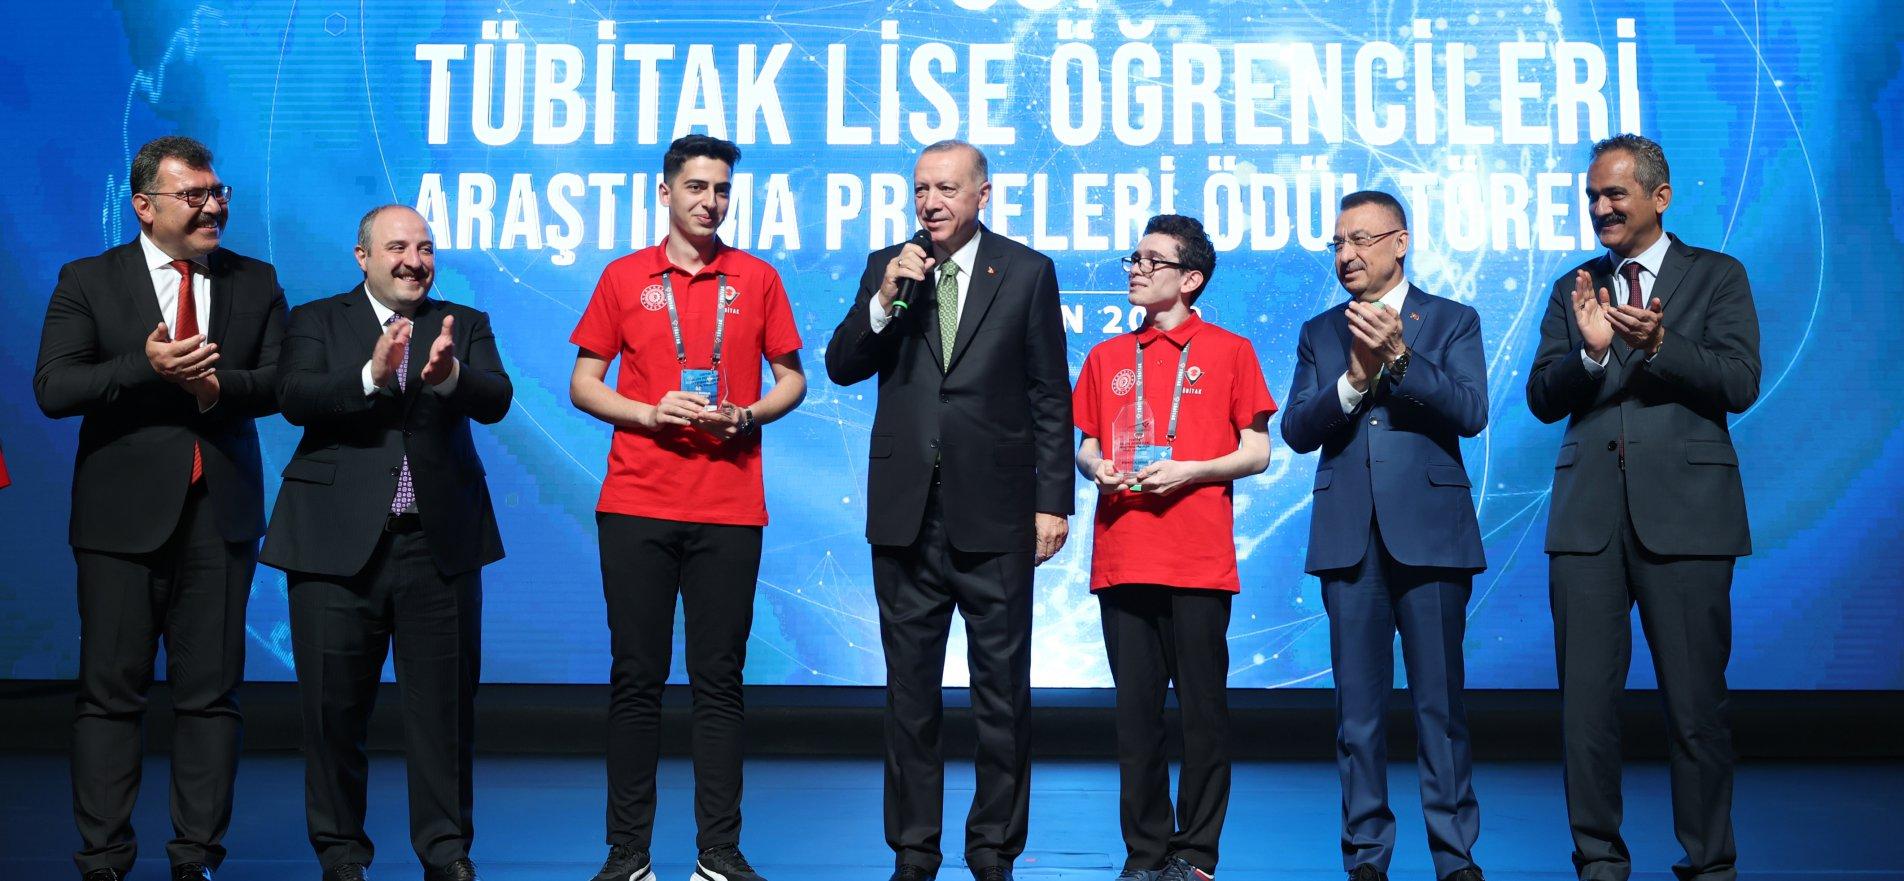 PRESIDENT ERDOĞAN PRESENTS THE AWARDS TO THE WINNERS OF TÜBİTAK RESEARCH PROJECT CONTEST